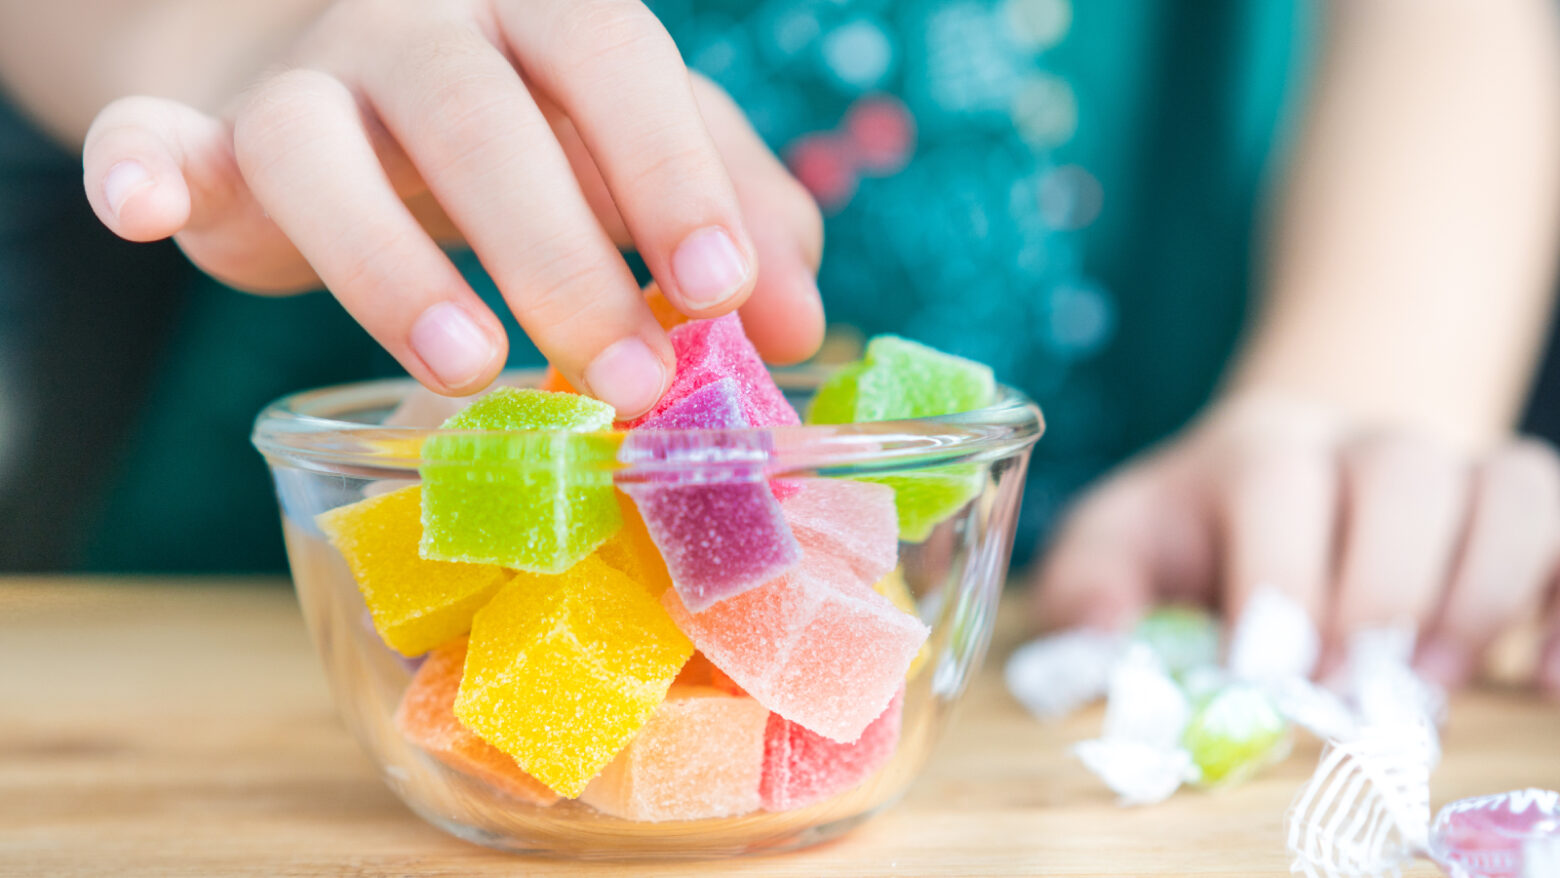 Close-up of a child's hand reaching into a bowl of colorful, sugary candies.